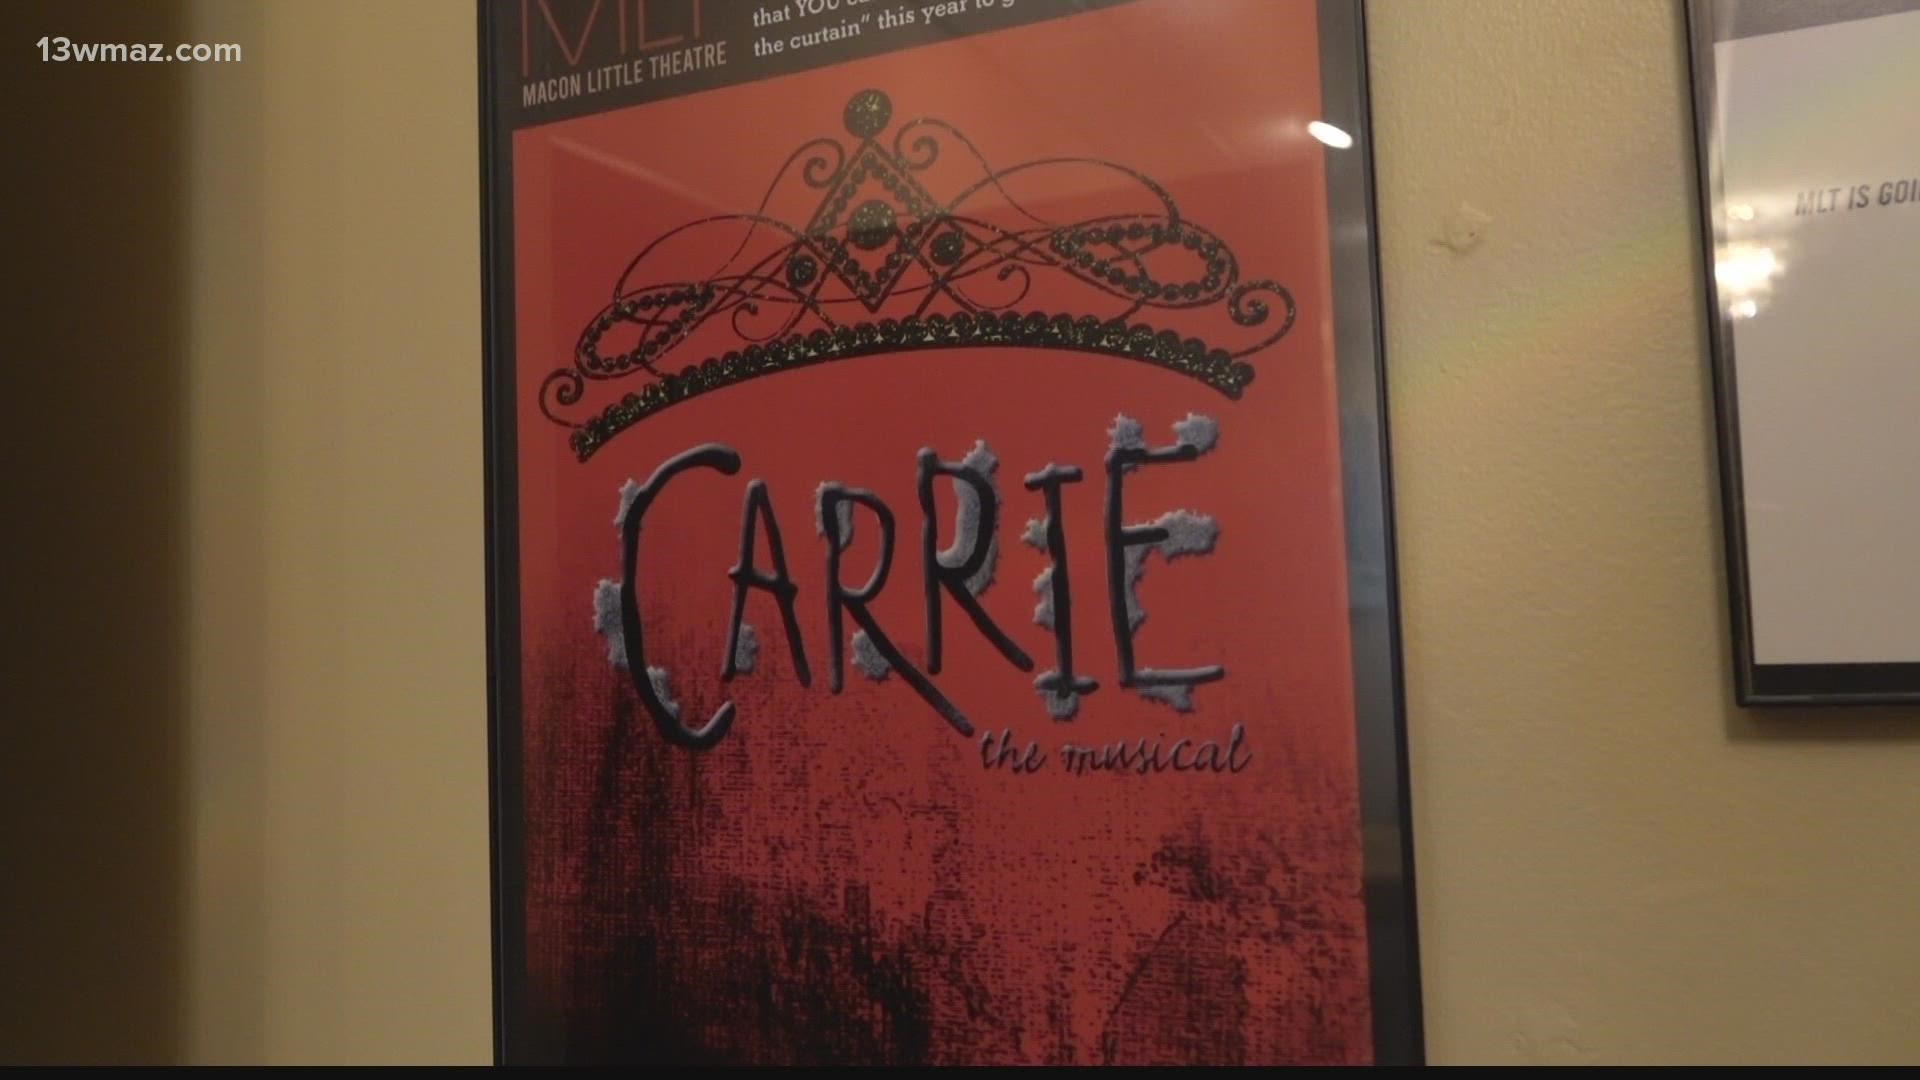 The performance of Carrie: The Musical is the first in Macon Little Theatre's more mature show schedule called MLT: After Dark.